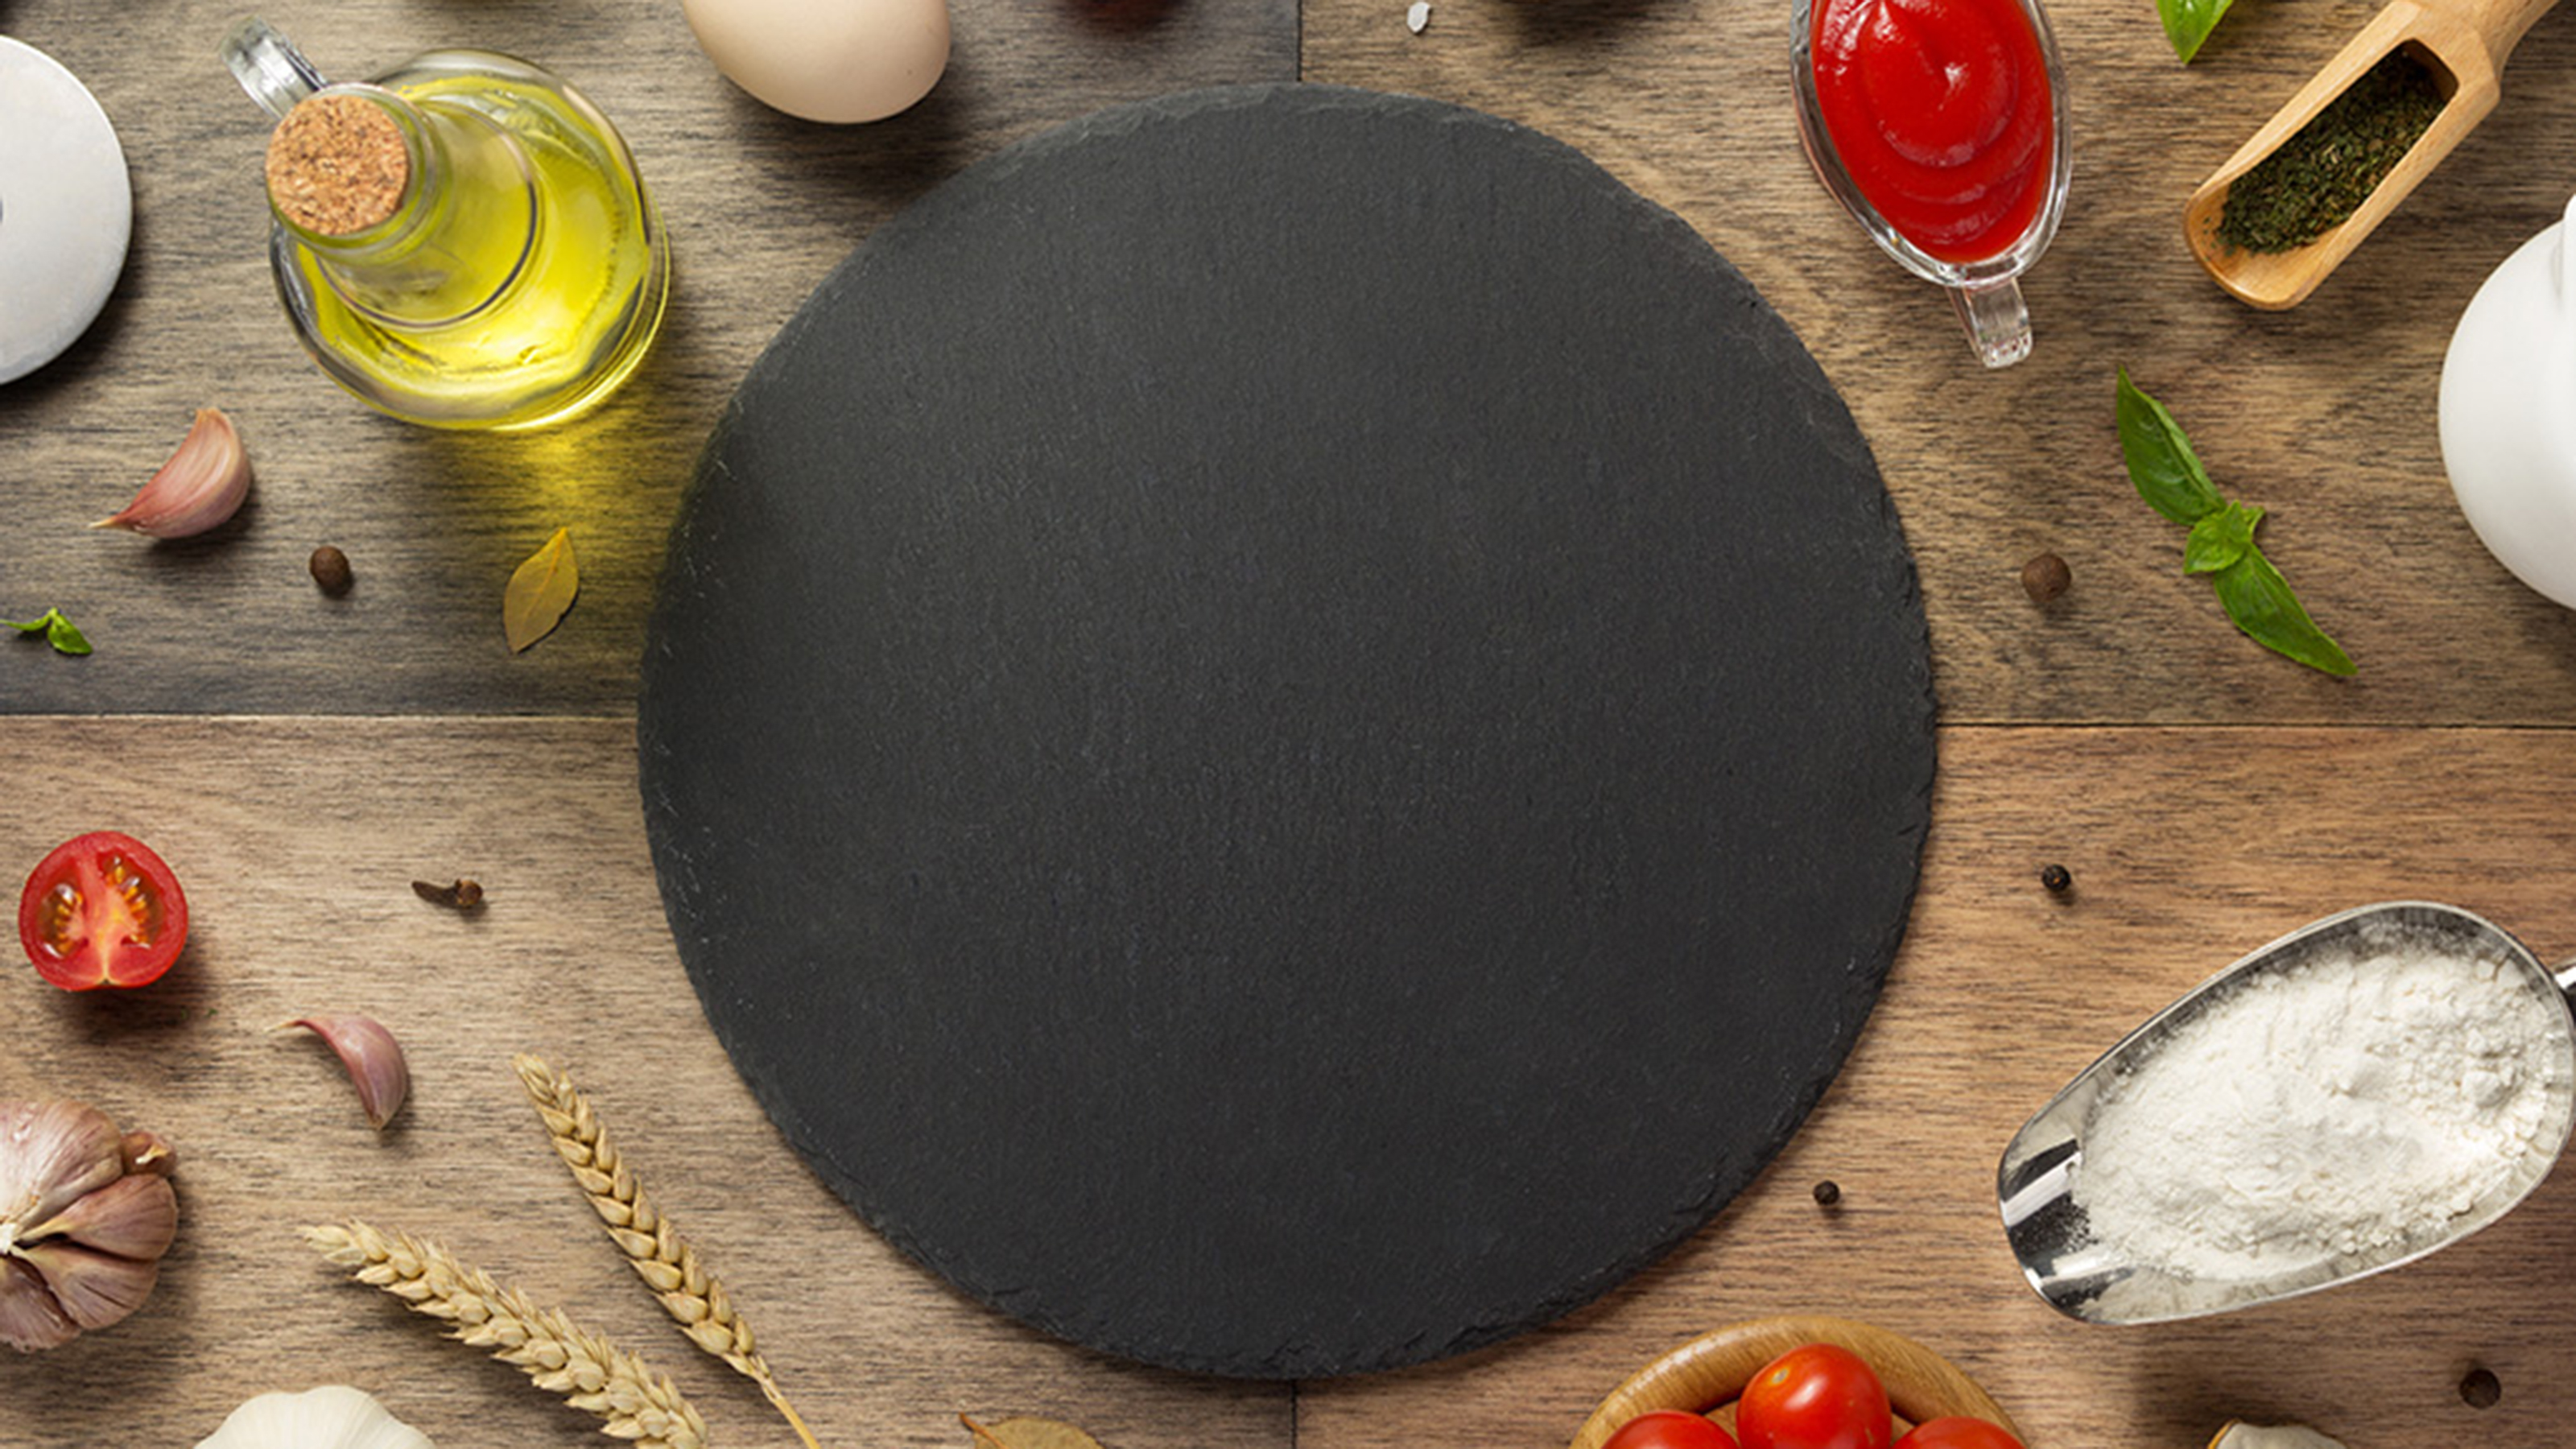 How to Clean a Pizza Stone to Remove Stuck-On Food and Stains